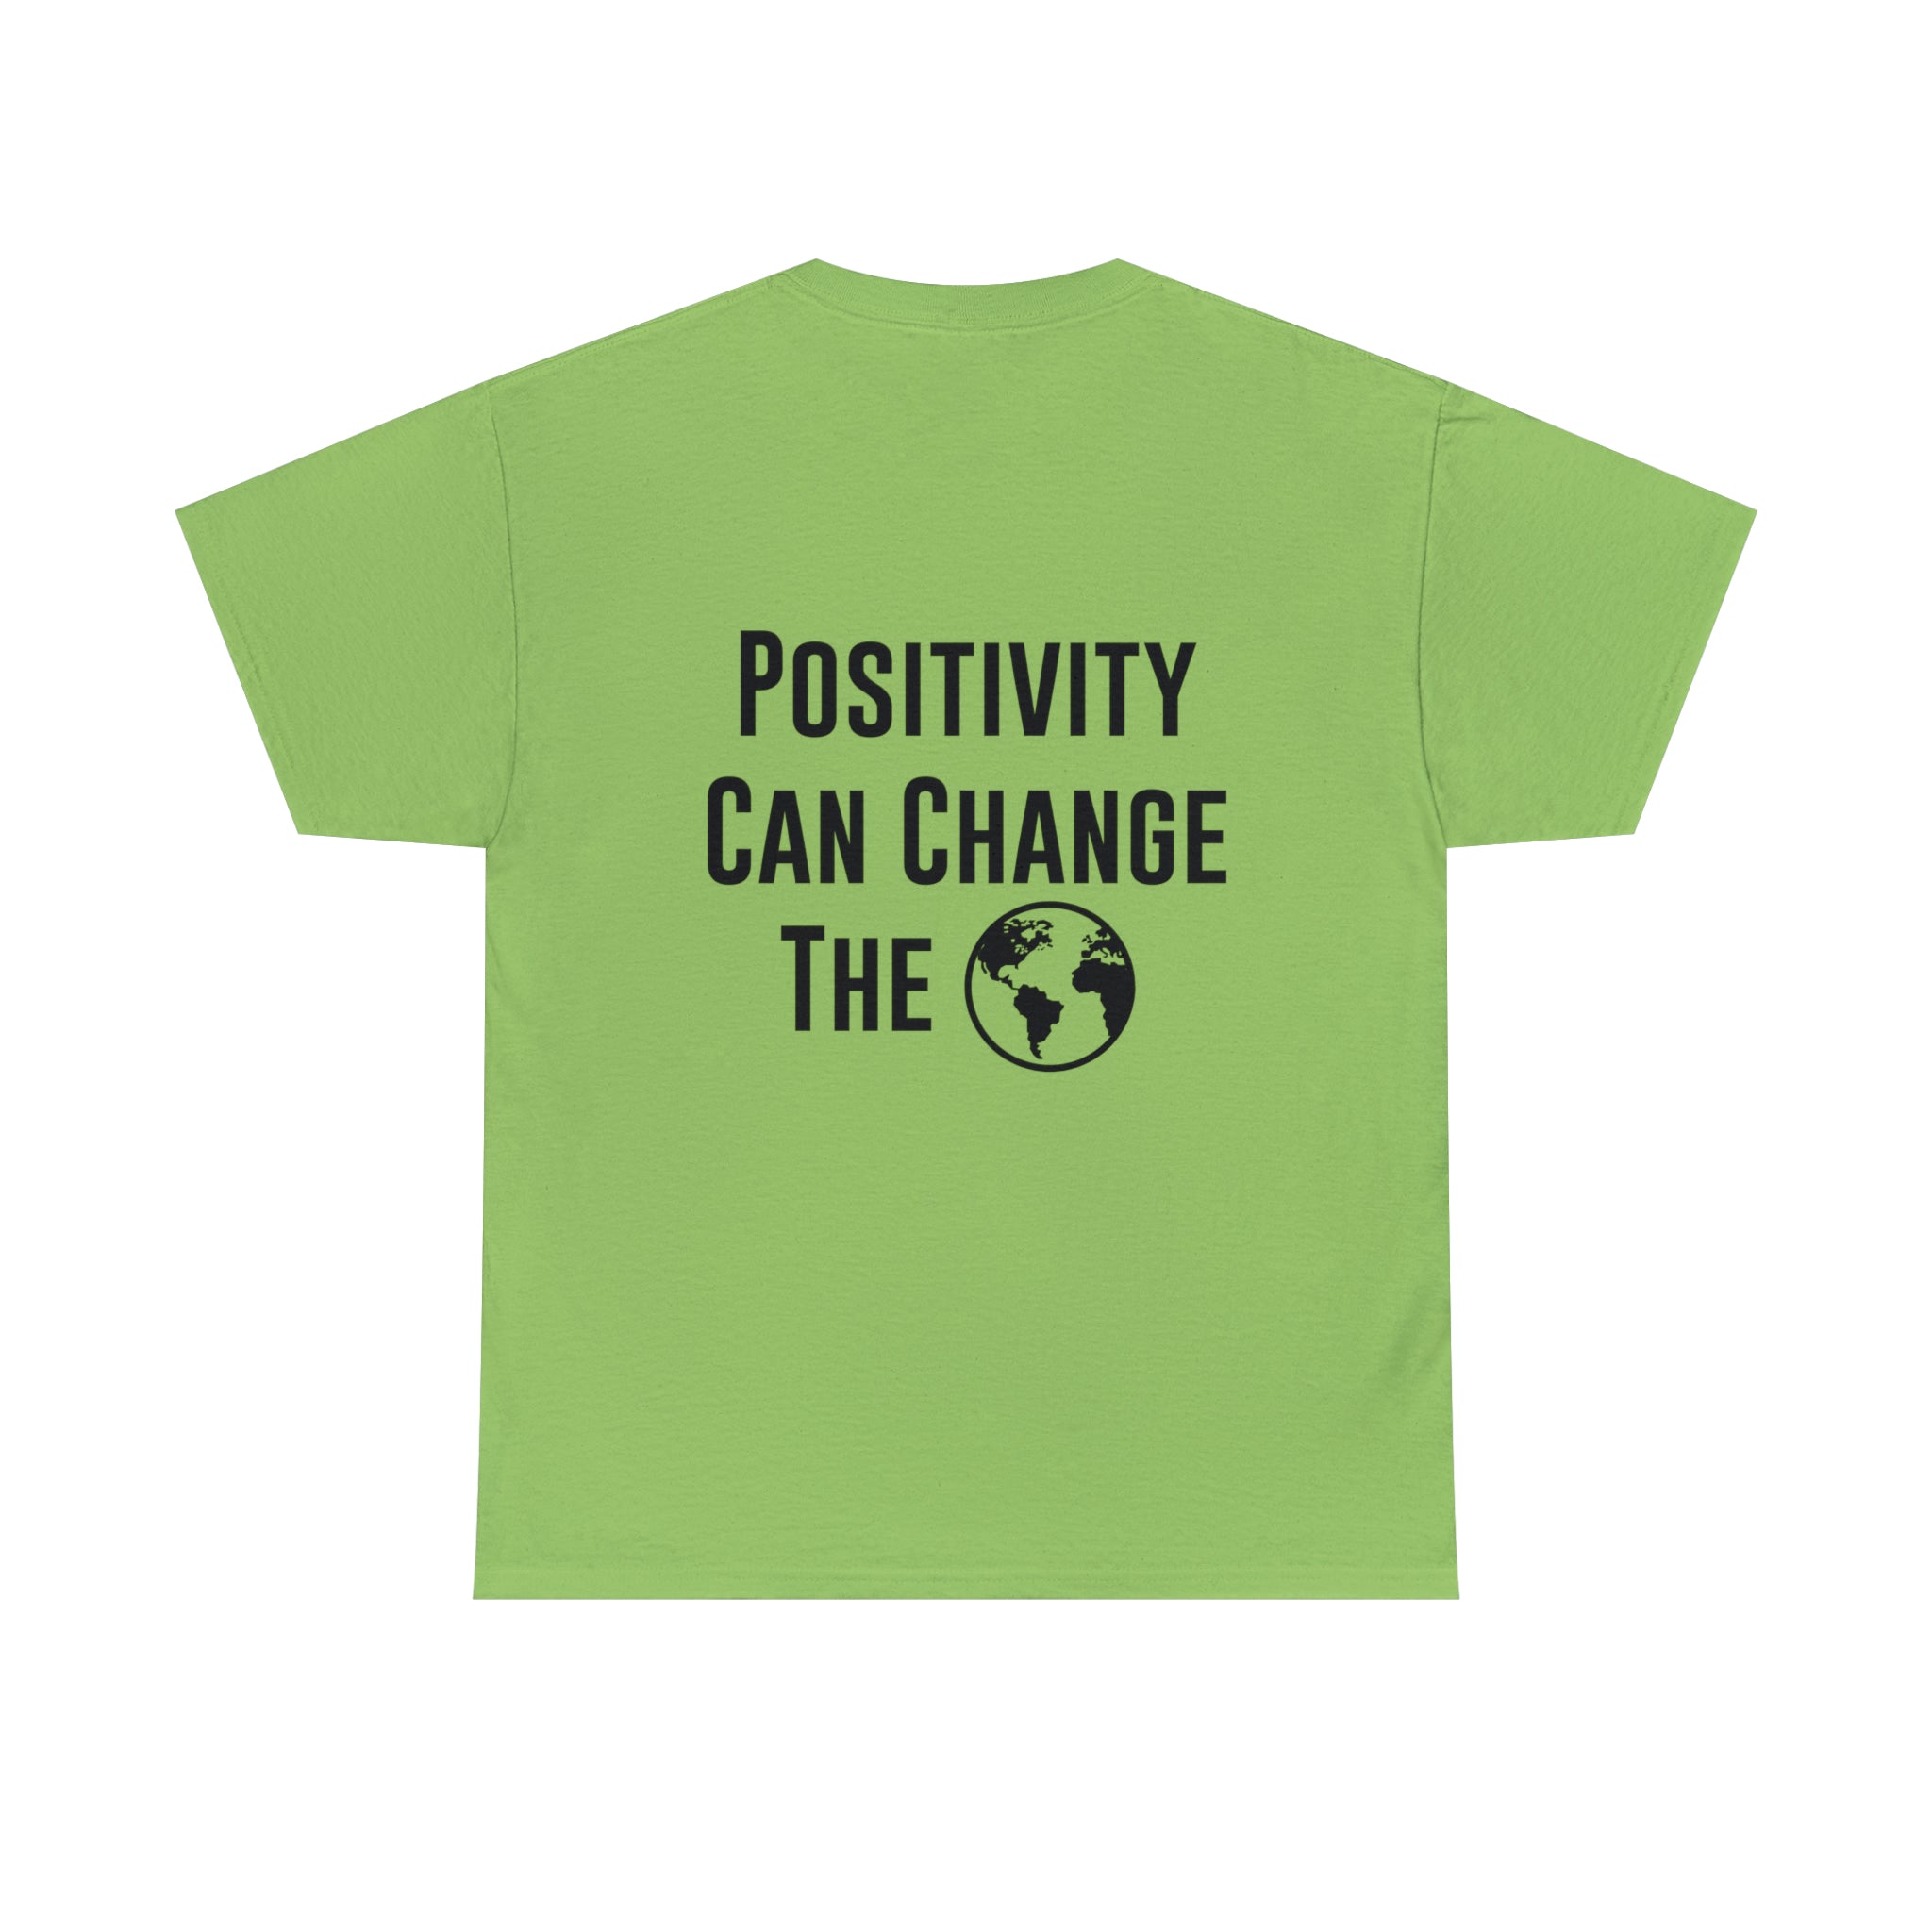 Positivity Can Change The World Short Sleeve Tee